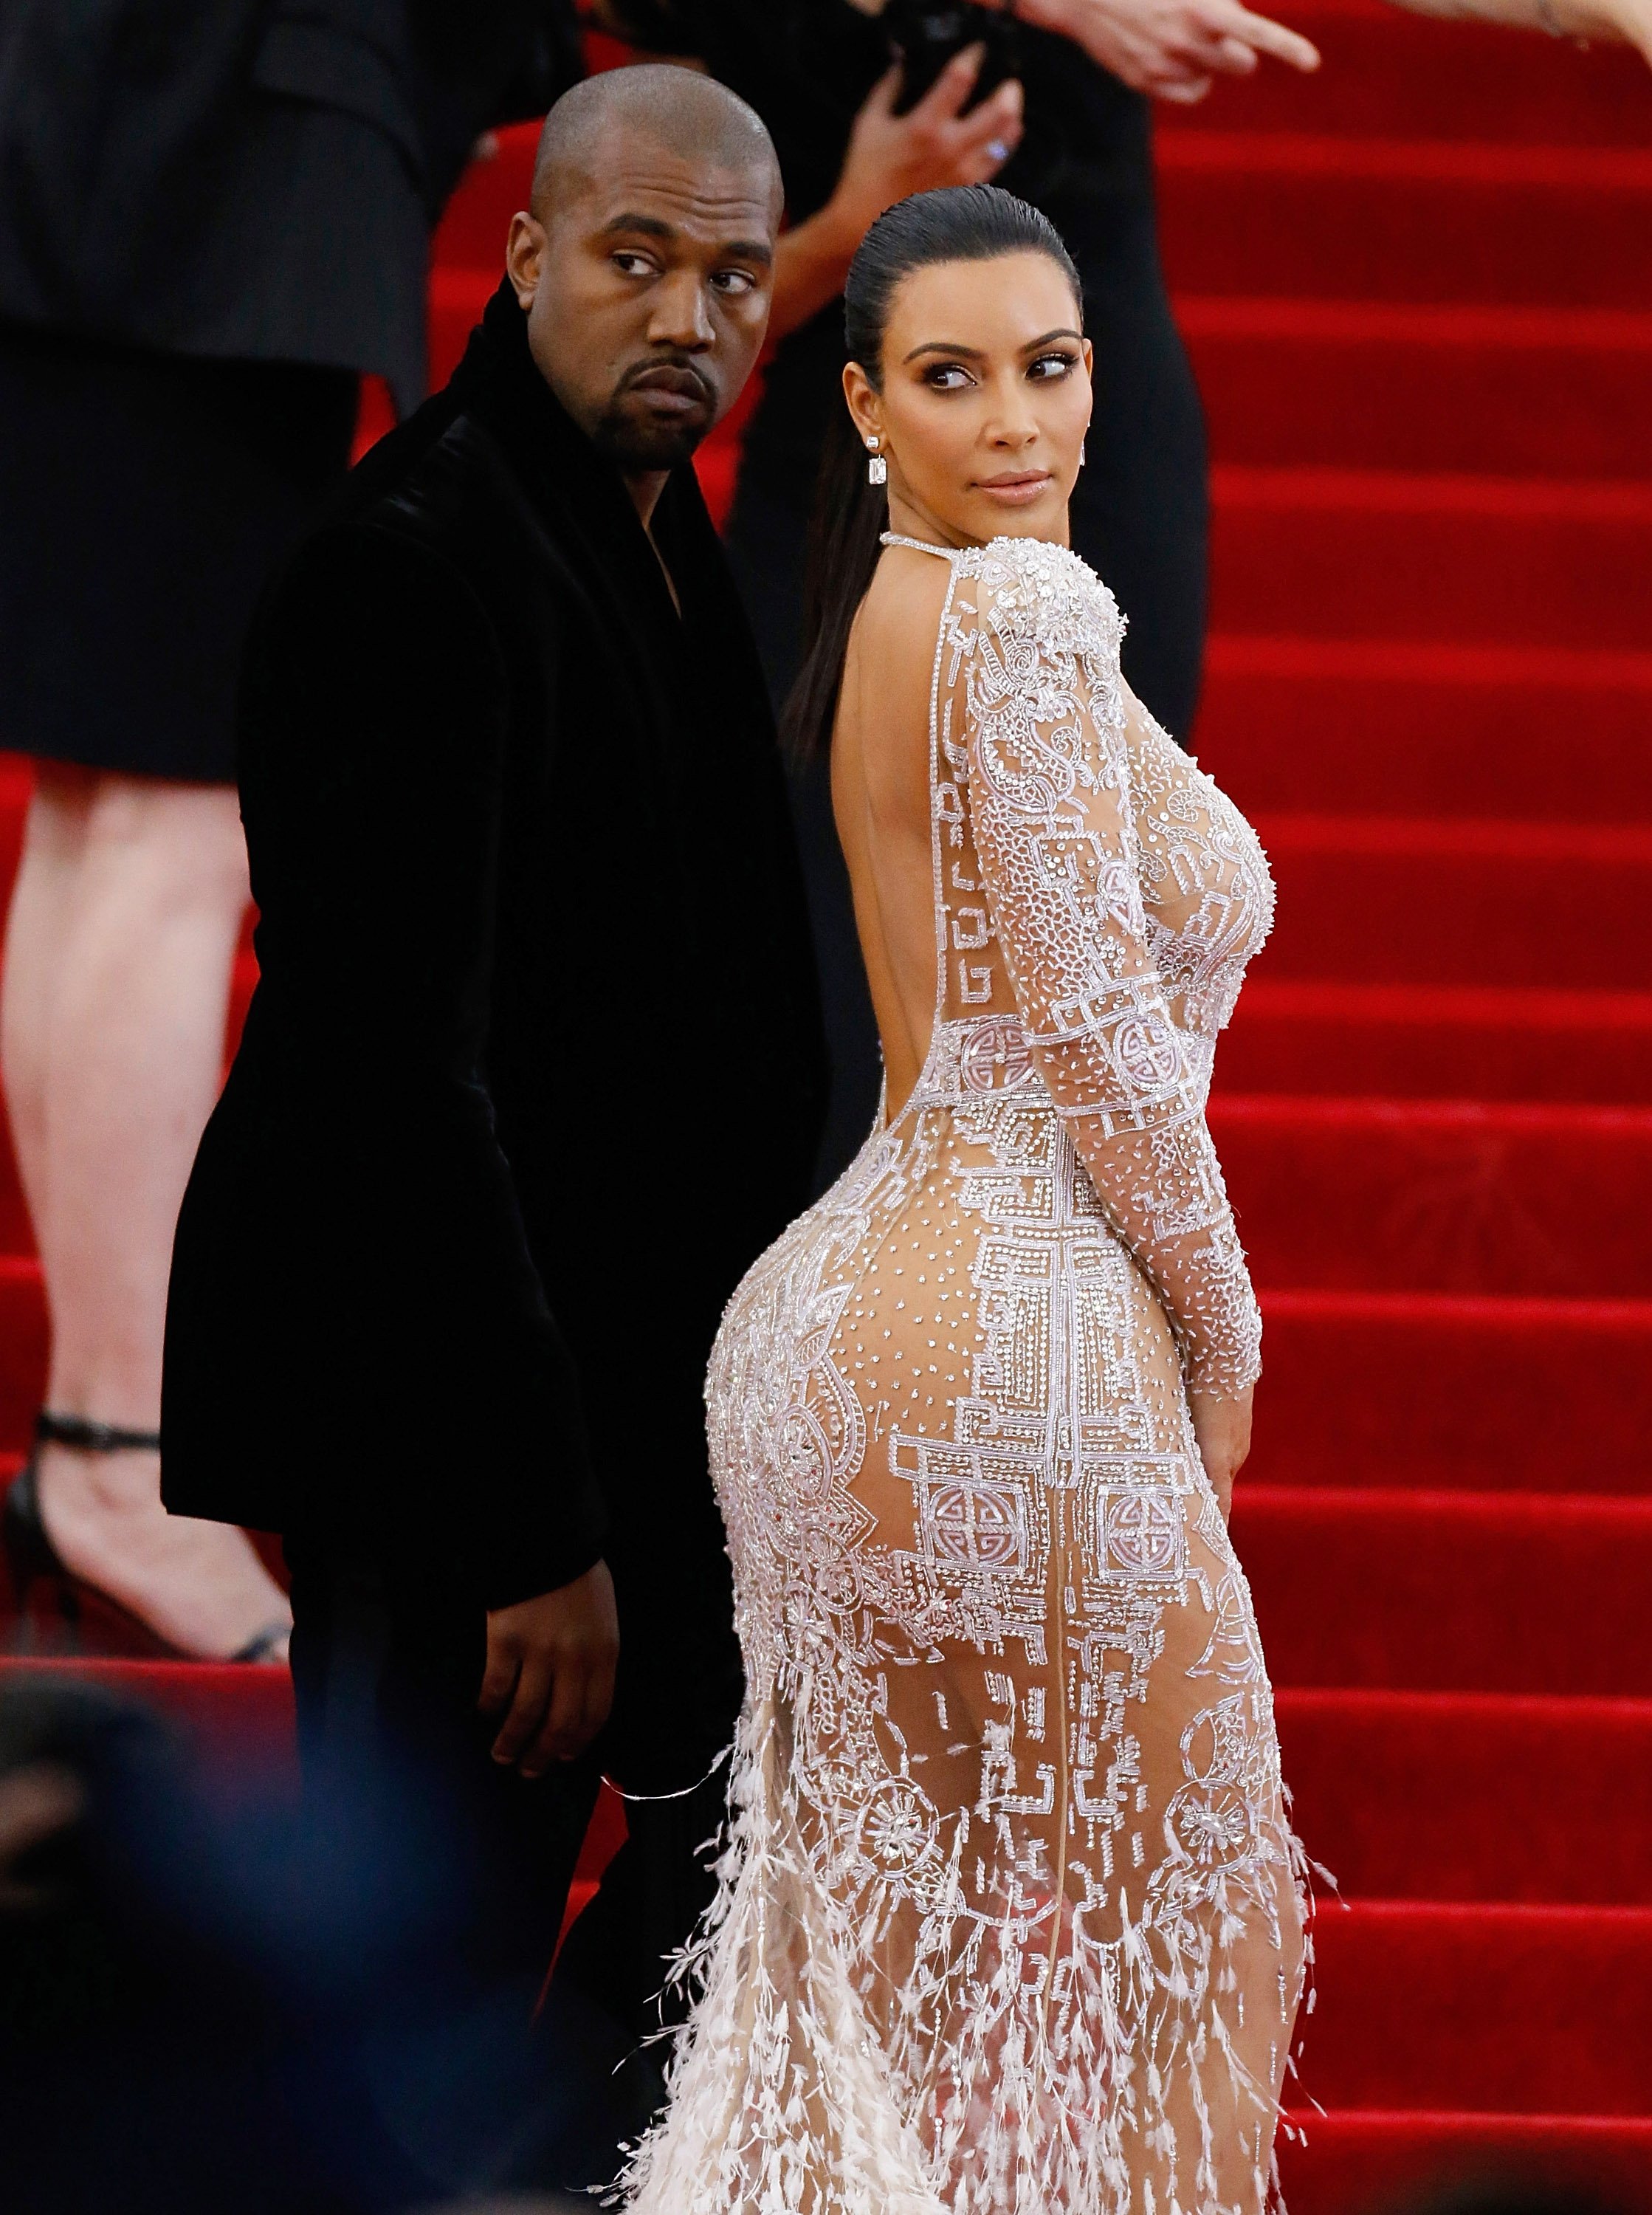 Kanye West and Kim Kardashian attend "China: Through The Looking Glass" Costume Institute Benefit Gala | Source: Getty Images